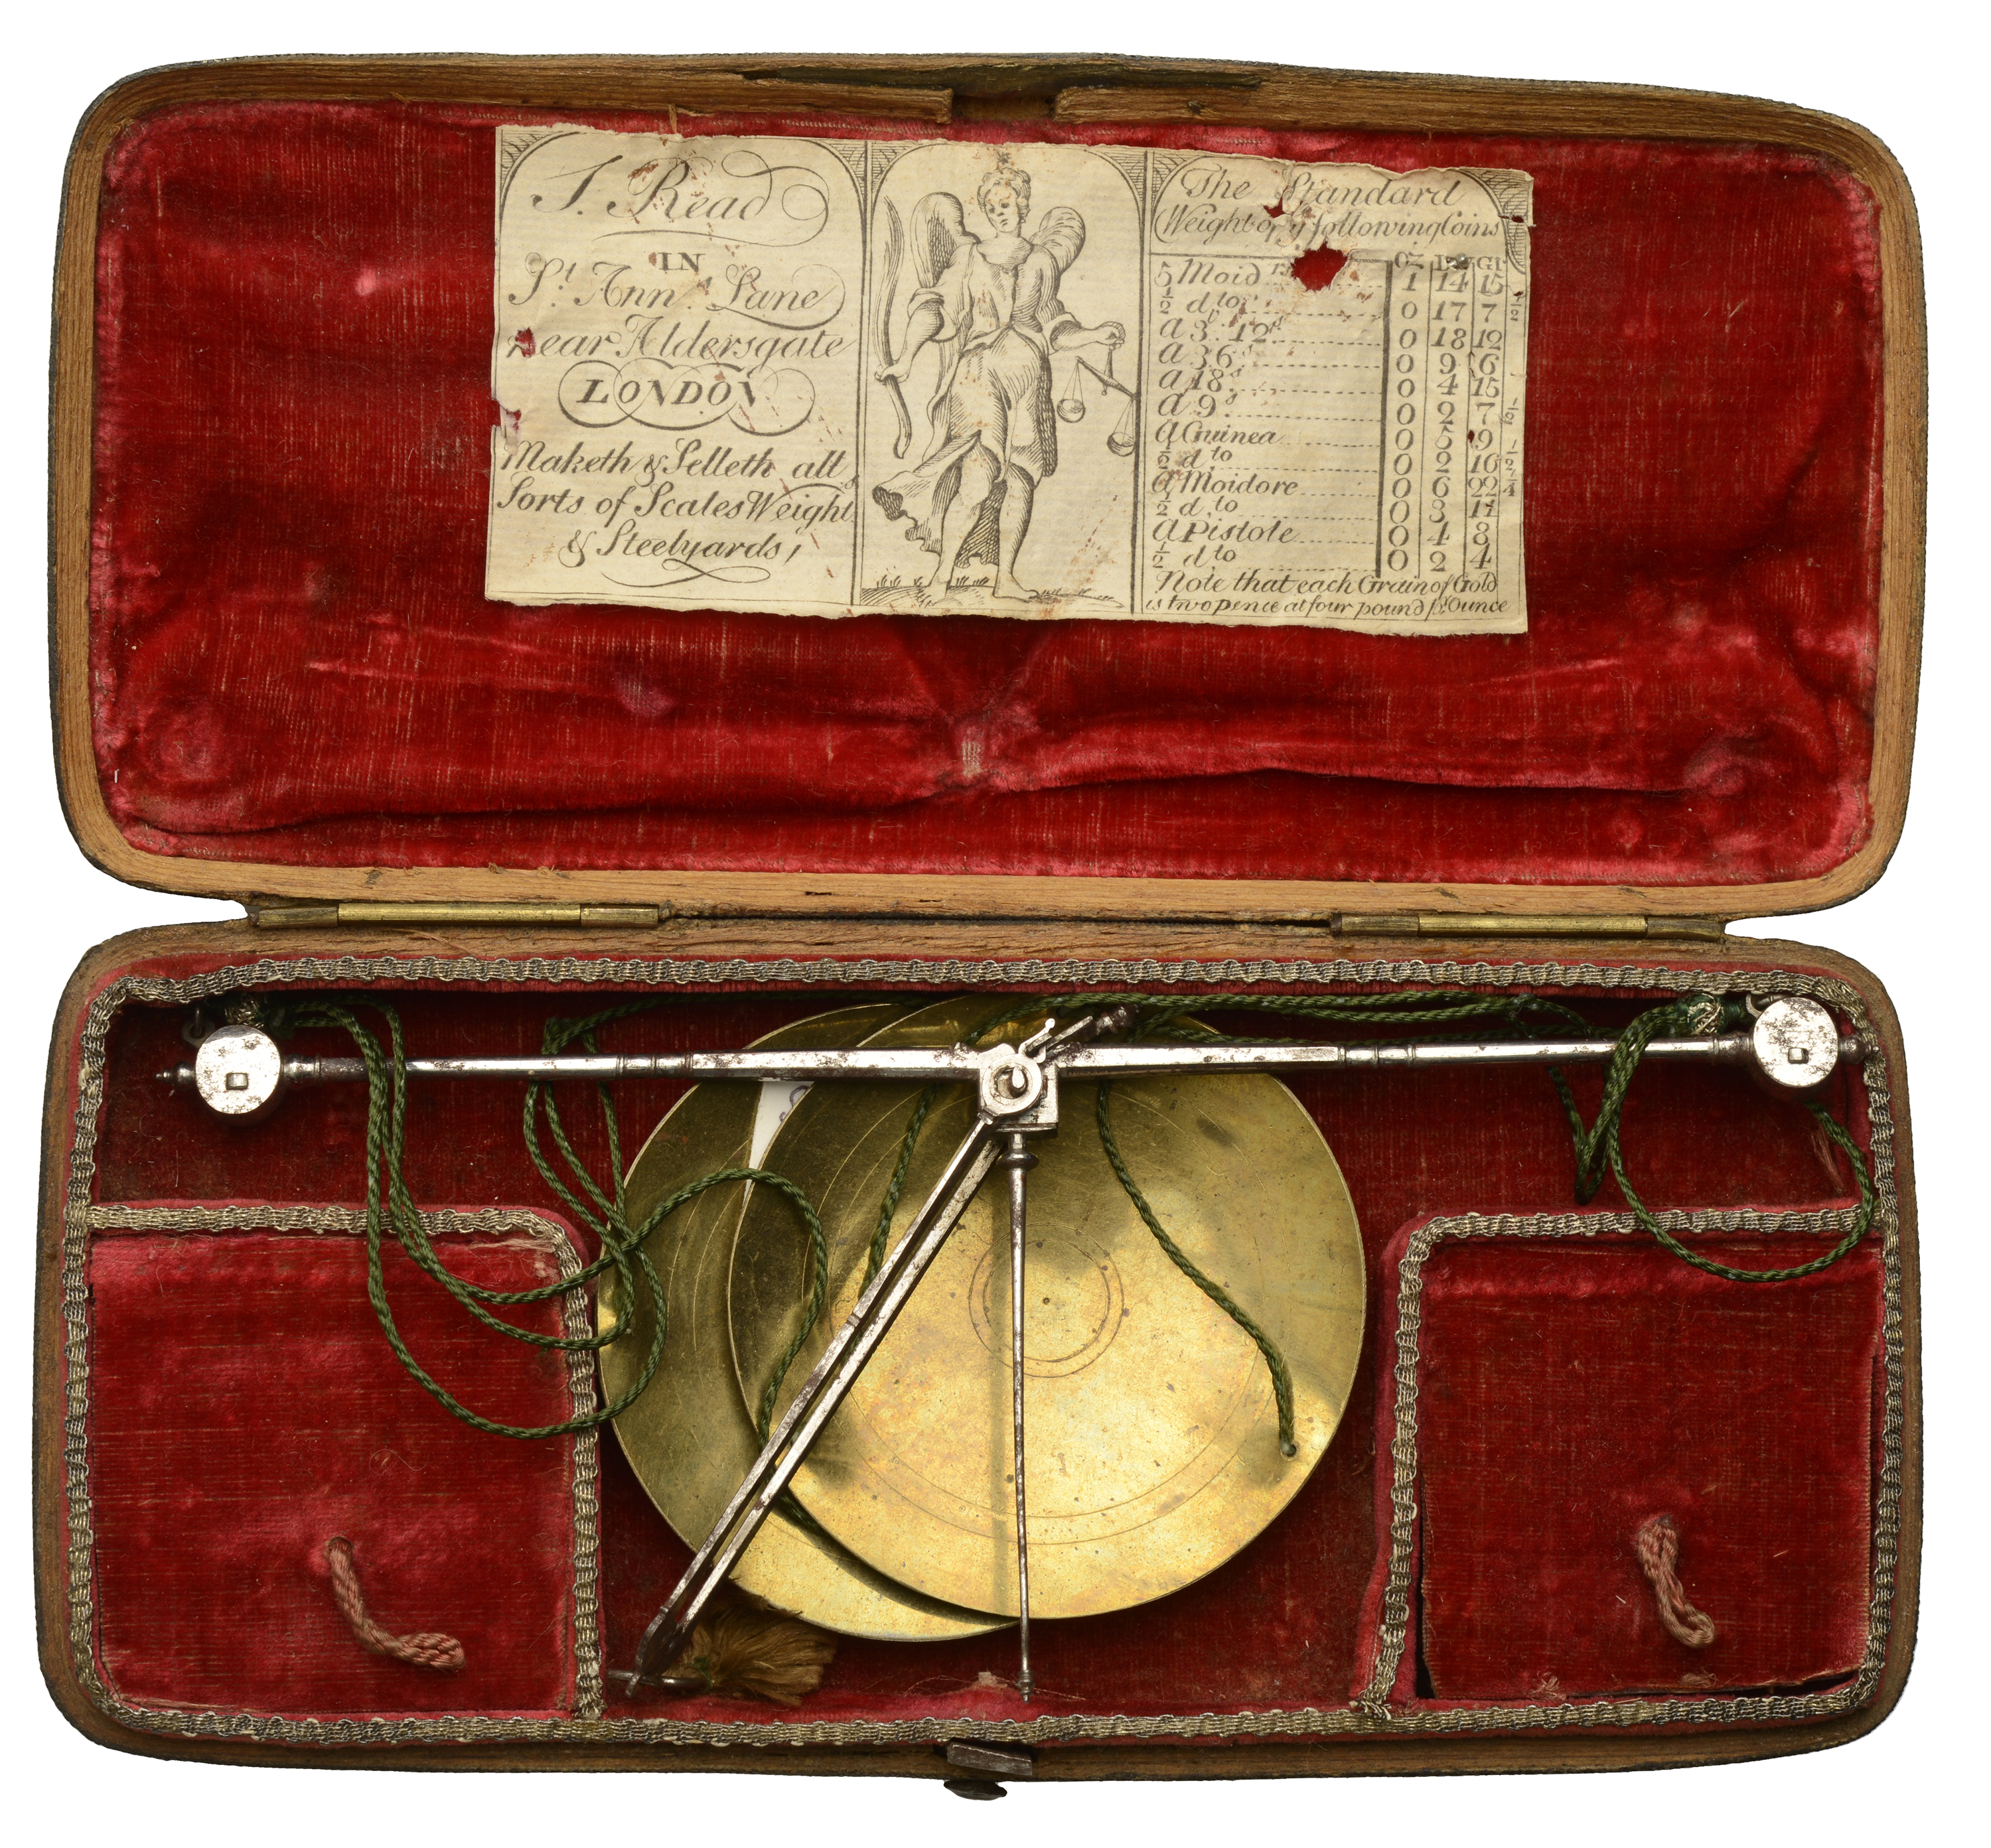 A set of coin scales and weights by Samuel Read, London, comprising a steel balance with bra...